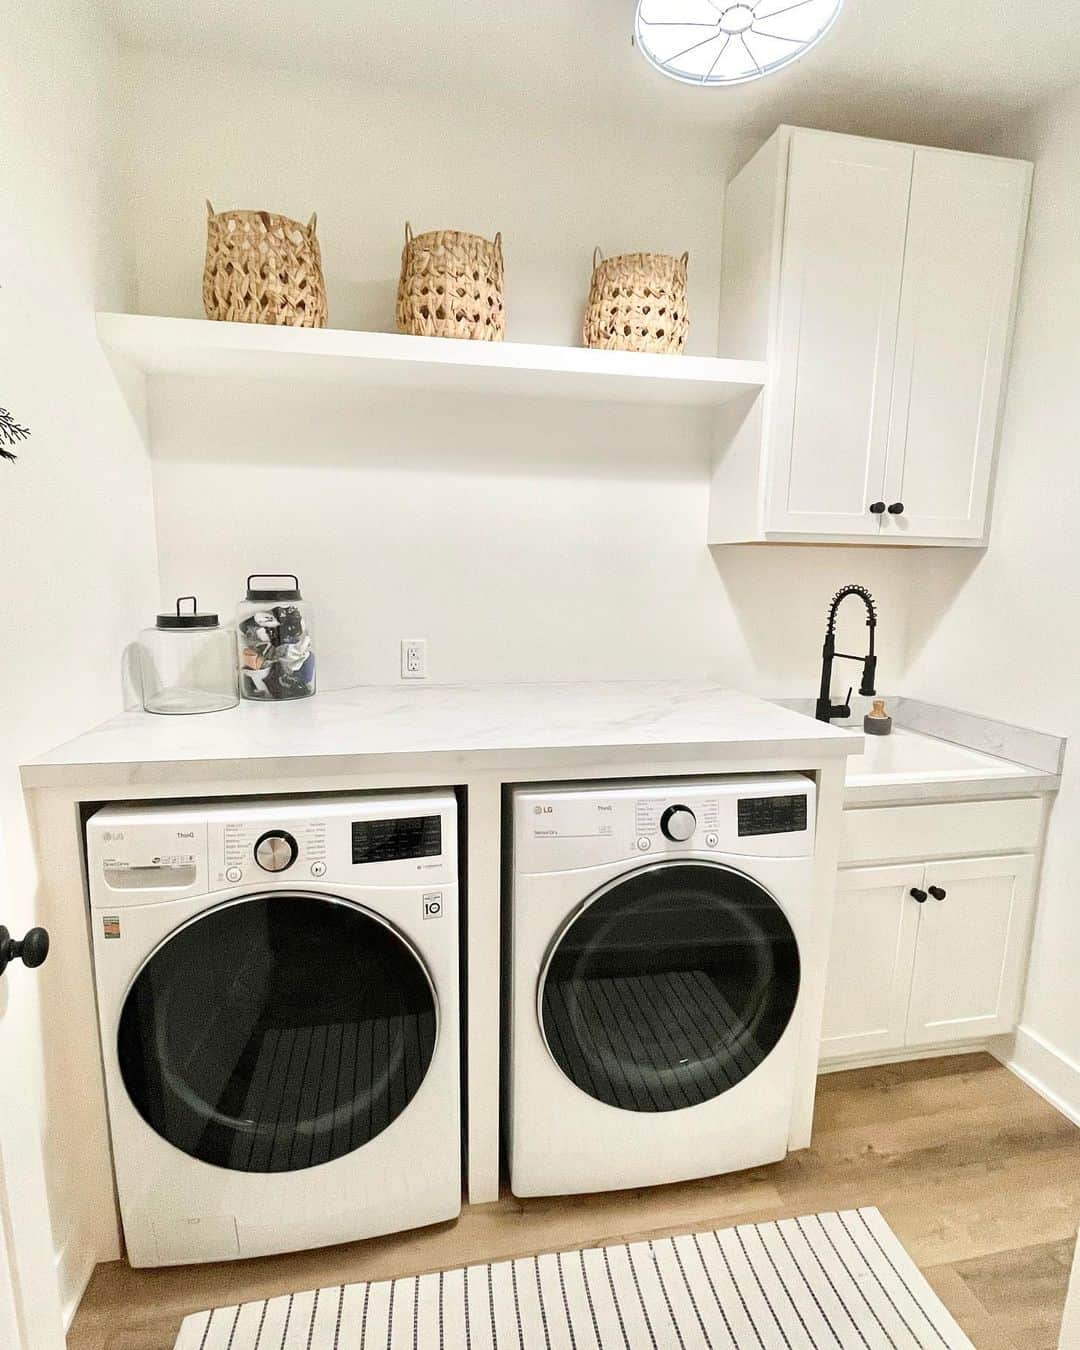 White Walls To Brighten a Laundry Room - Soul & Lane